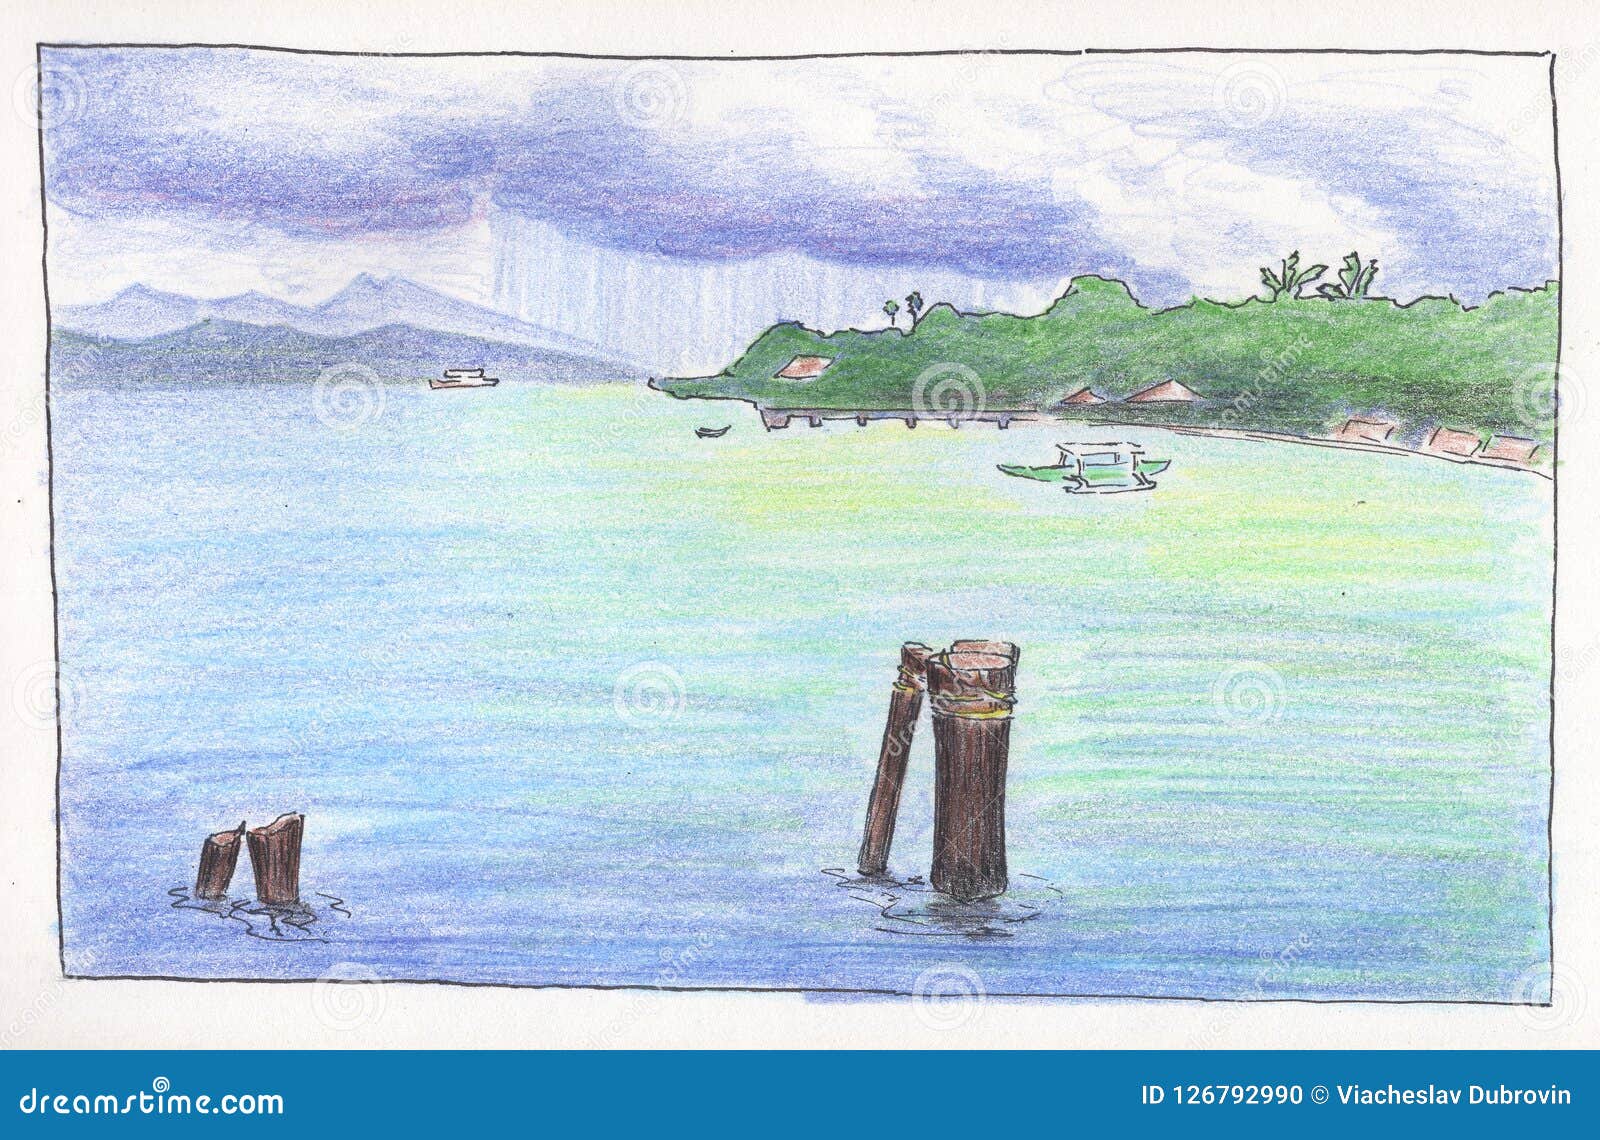 Seascape Pencil Drawing Stock Illustrations 287 Seascape Pencil Drawing Stock Illustrations Vectors Clipart Dreamstime